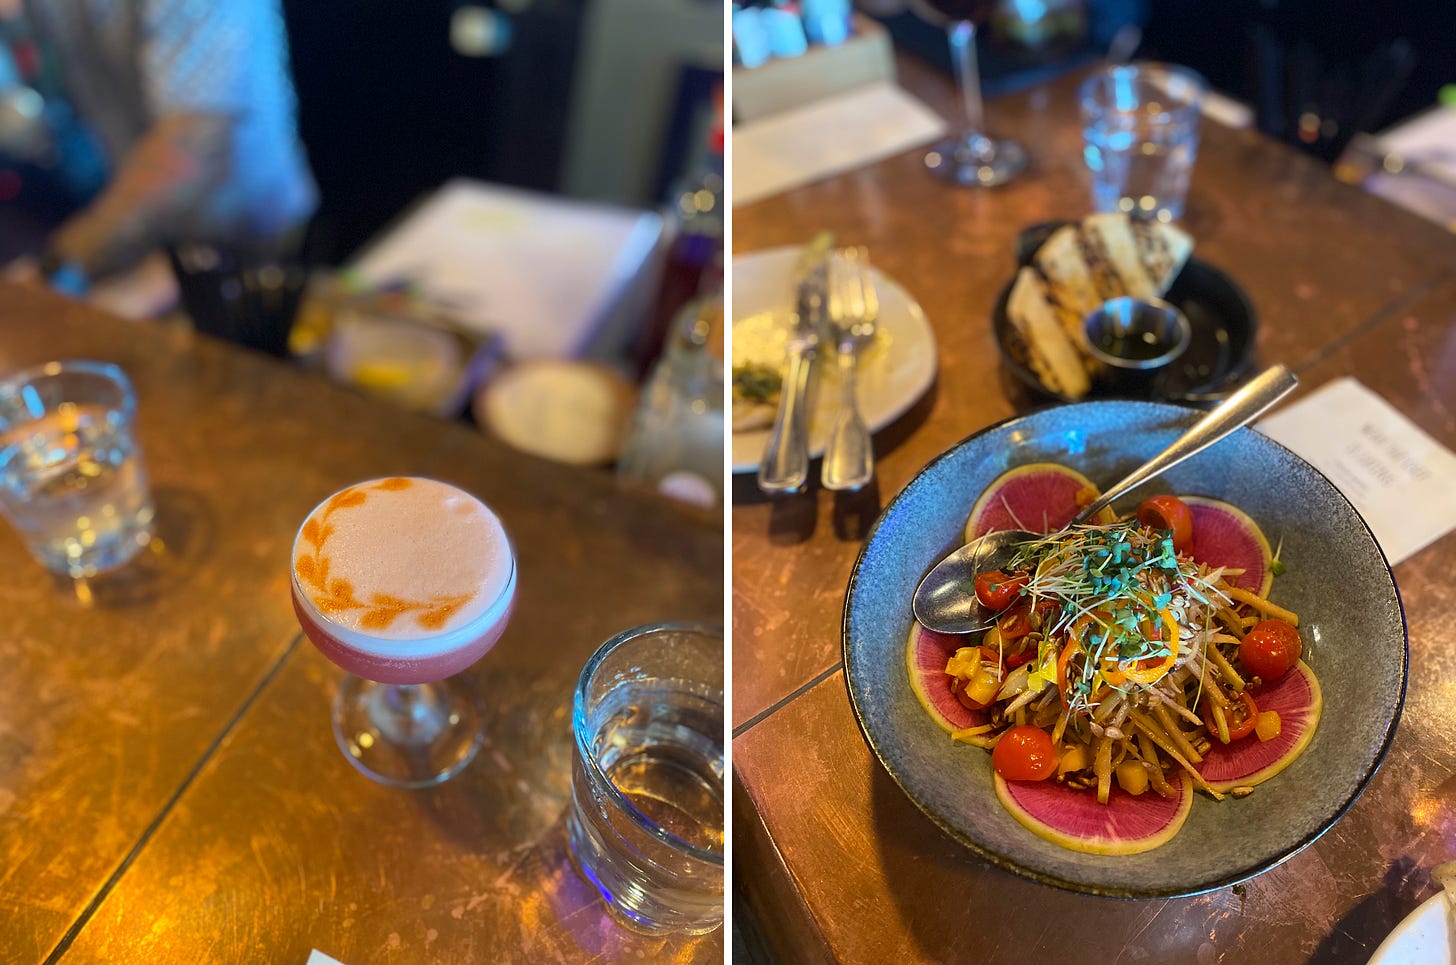 left image: a cocktail in a coupé glass, pinkish with an egg white foam on top and a heart design in bitters around the left edge. right image: the papaya and mango salad mentioned above, with grape tomatoes, hot peppers, and microgreens, on slices of watermelon radish at the bottom. It's in a blue and black ceramic bowl with a serving spoon at the back.